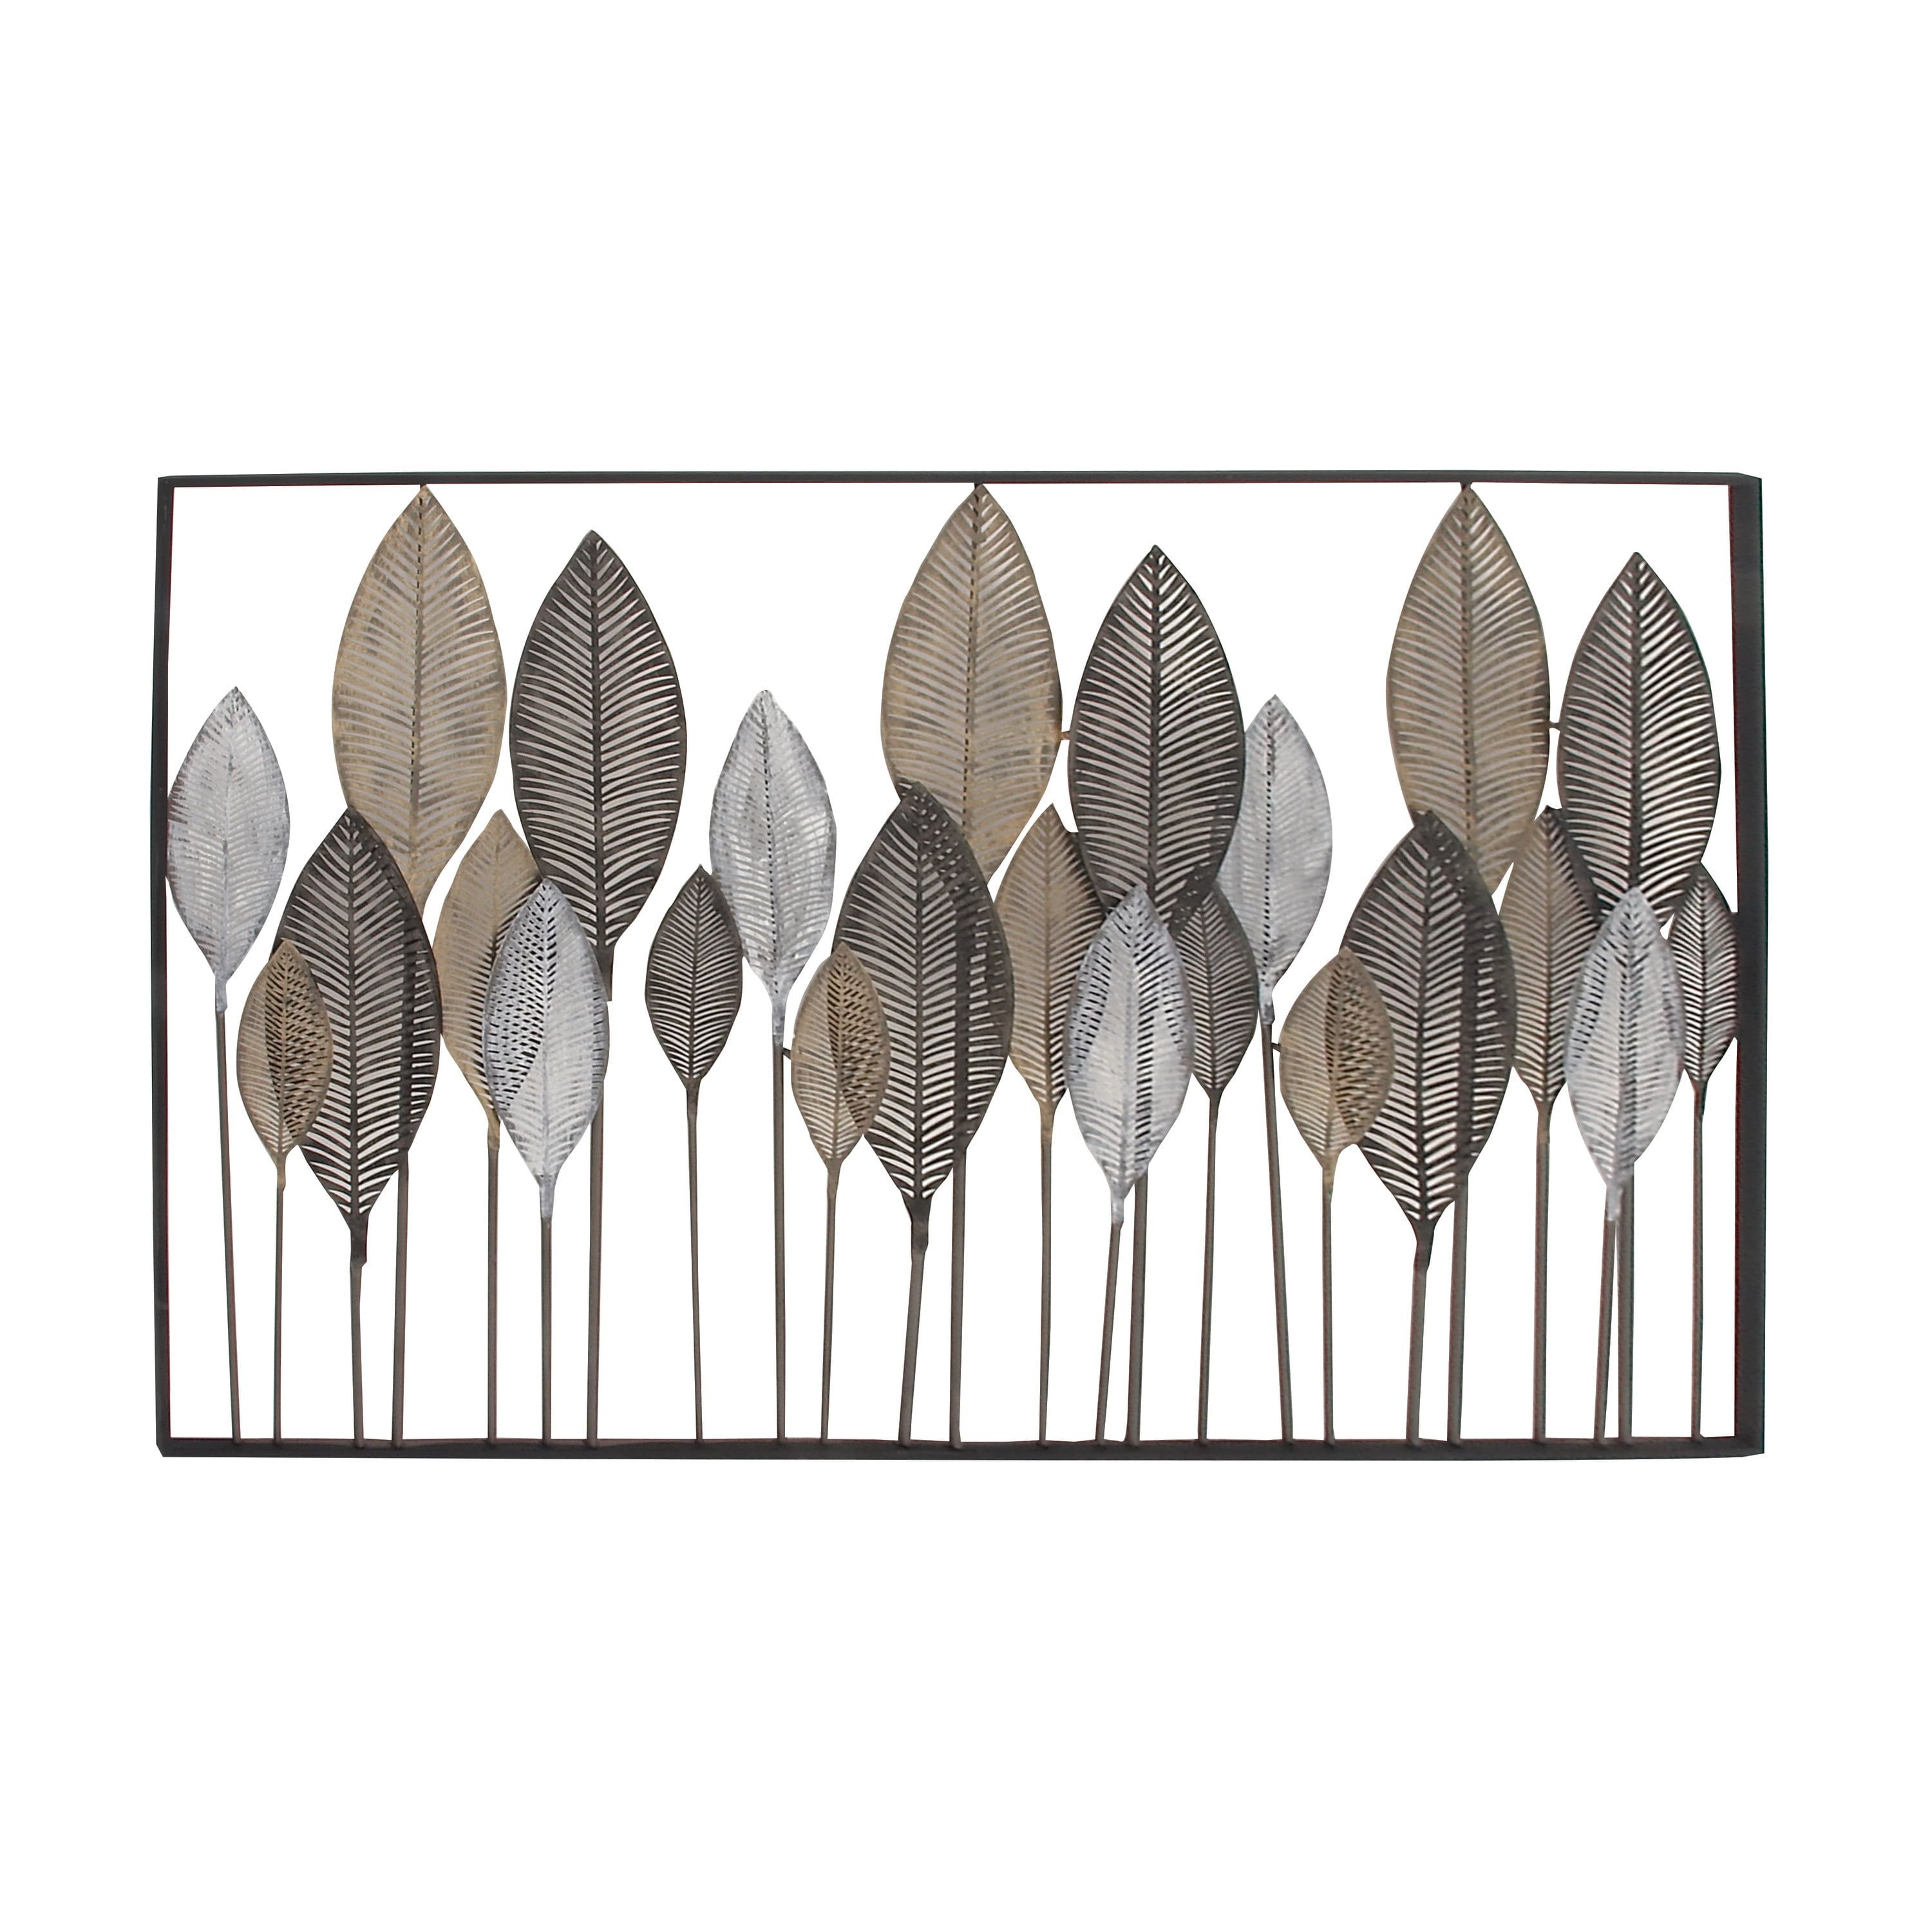 Decmode Bronze Metal Tall Cut Out Leaf Wall Decor With Intricate Laser Cut  Designs – Walmart With Tall Cut Out Leaf Wall Art (View 7 of 15)